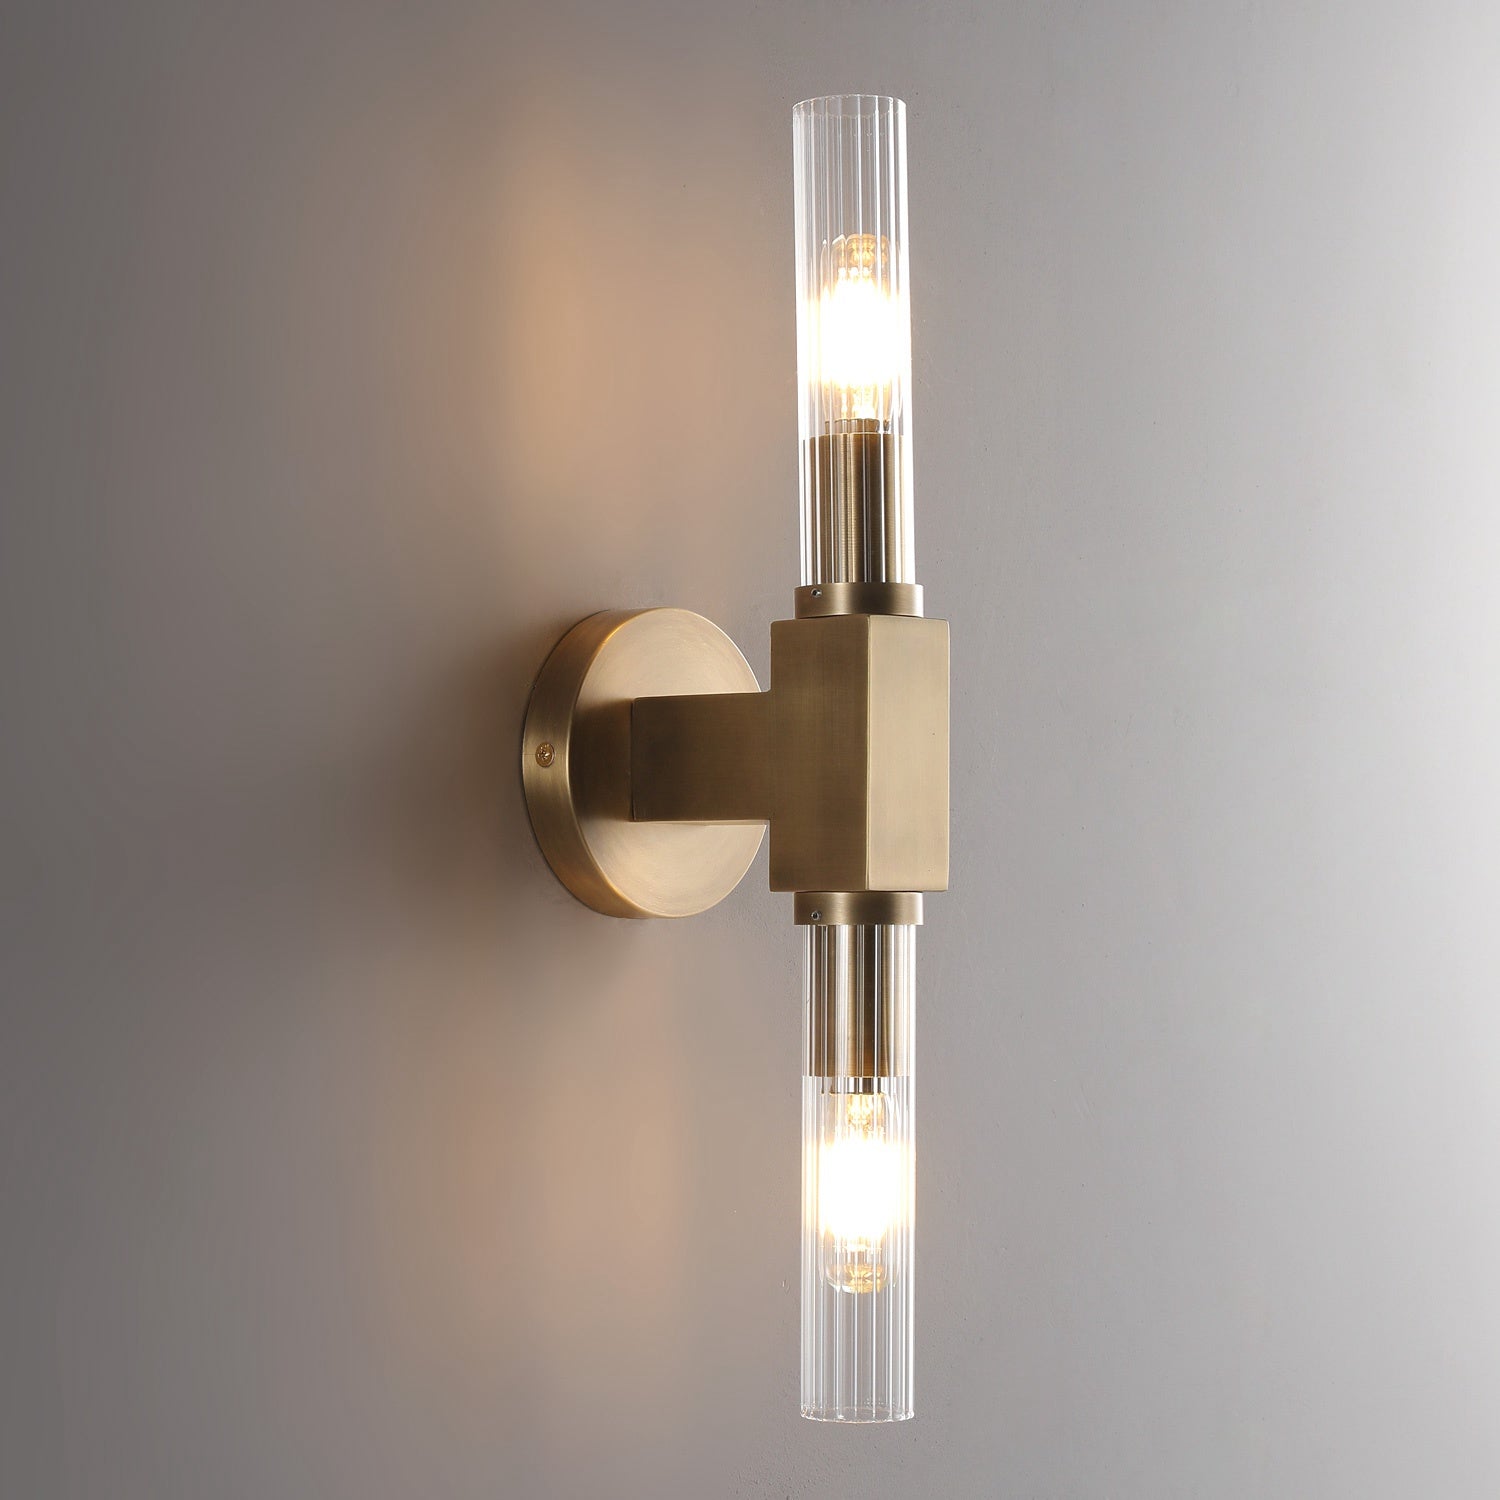 Industrial Sconce, Brass Modern Wall Sconces with Glass, Candlestick Wall Lights for Bedroom - Wing Lightings